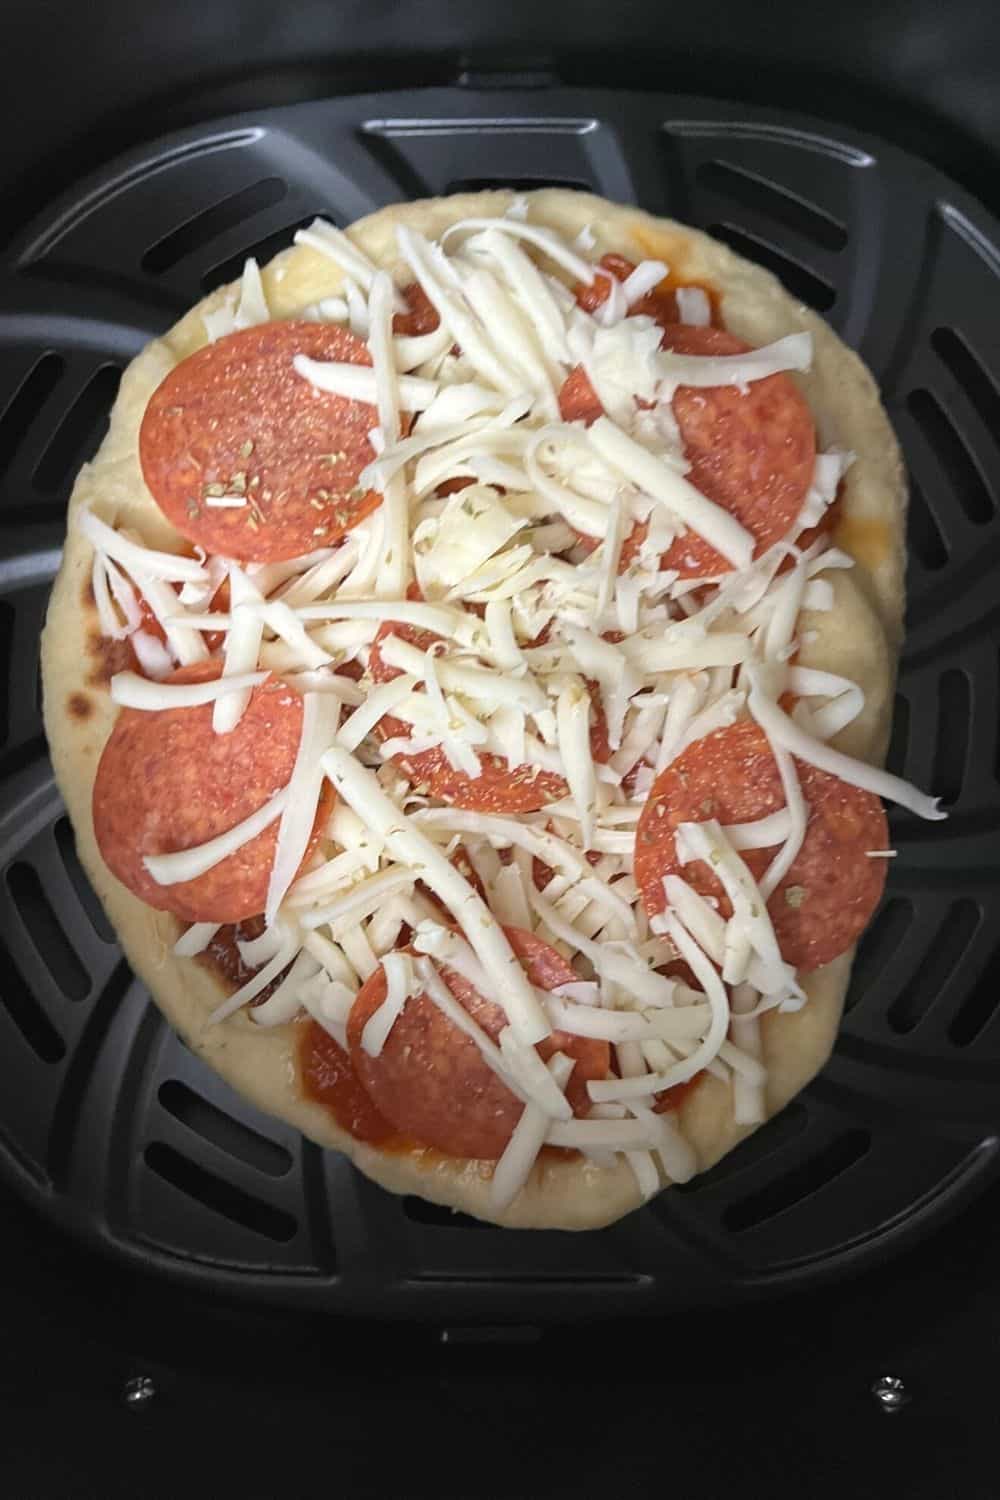 unbaked naan pizza in the basket of an air fryer